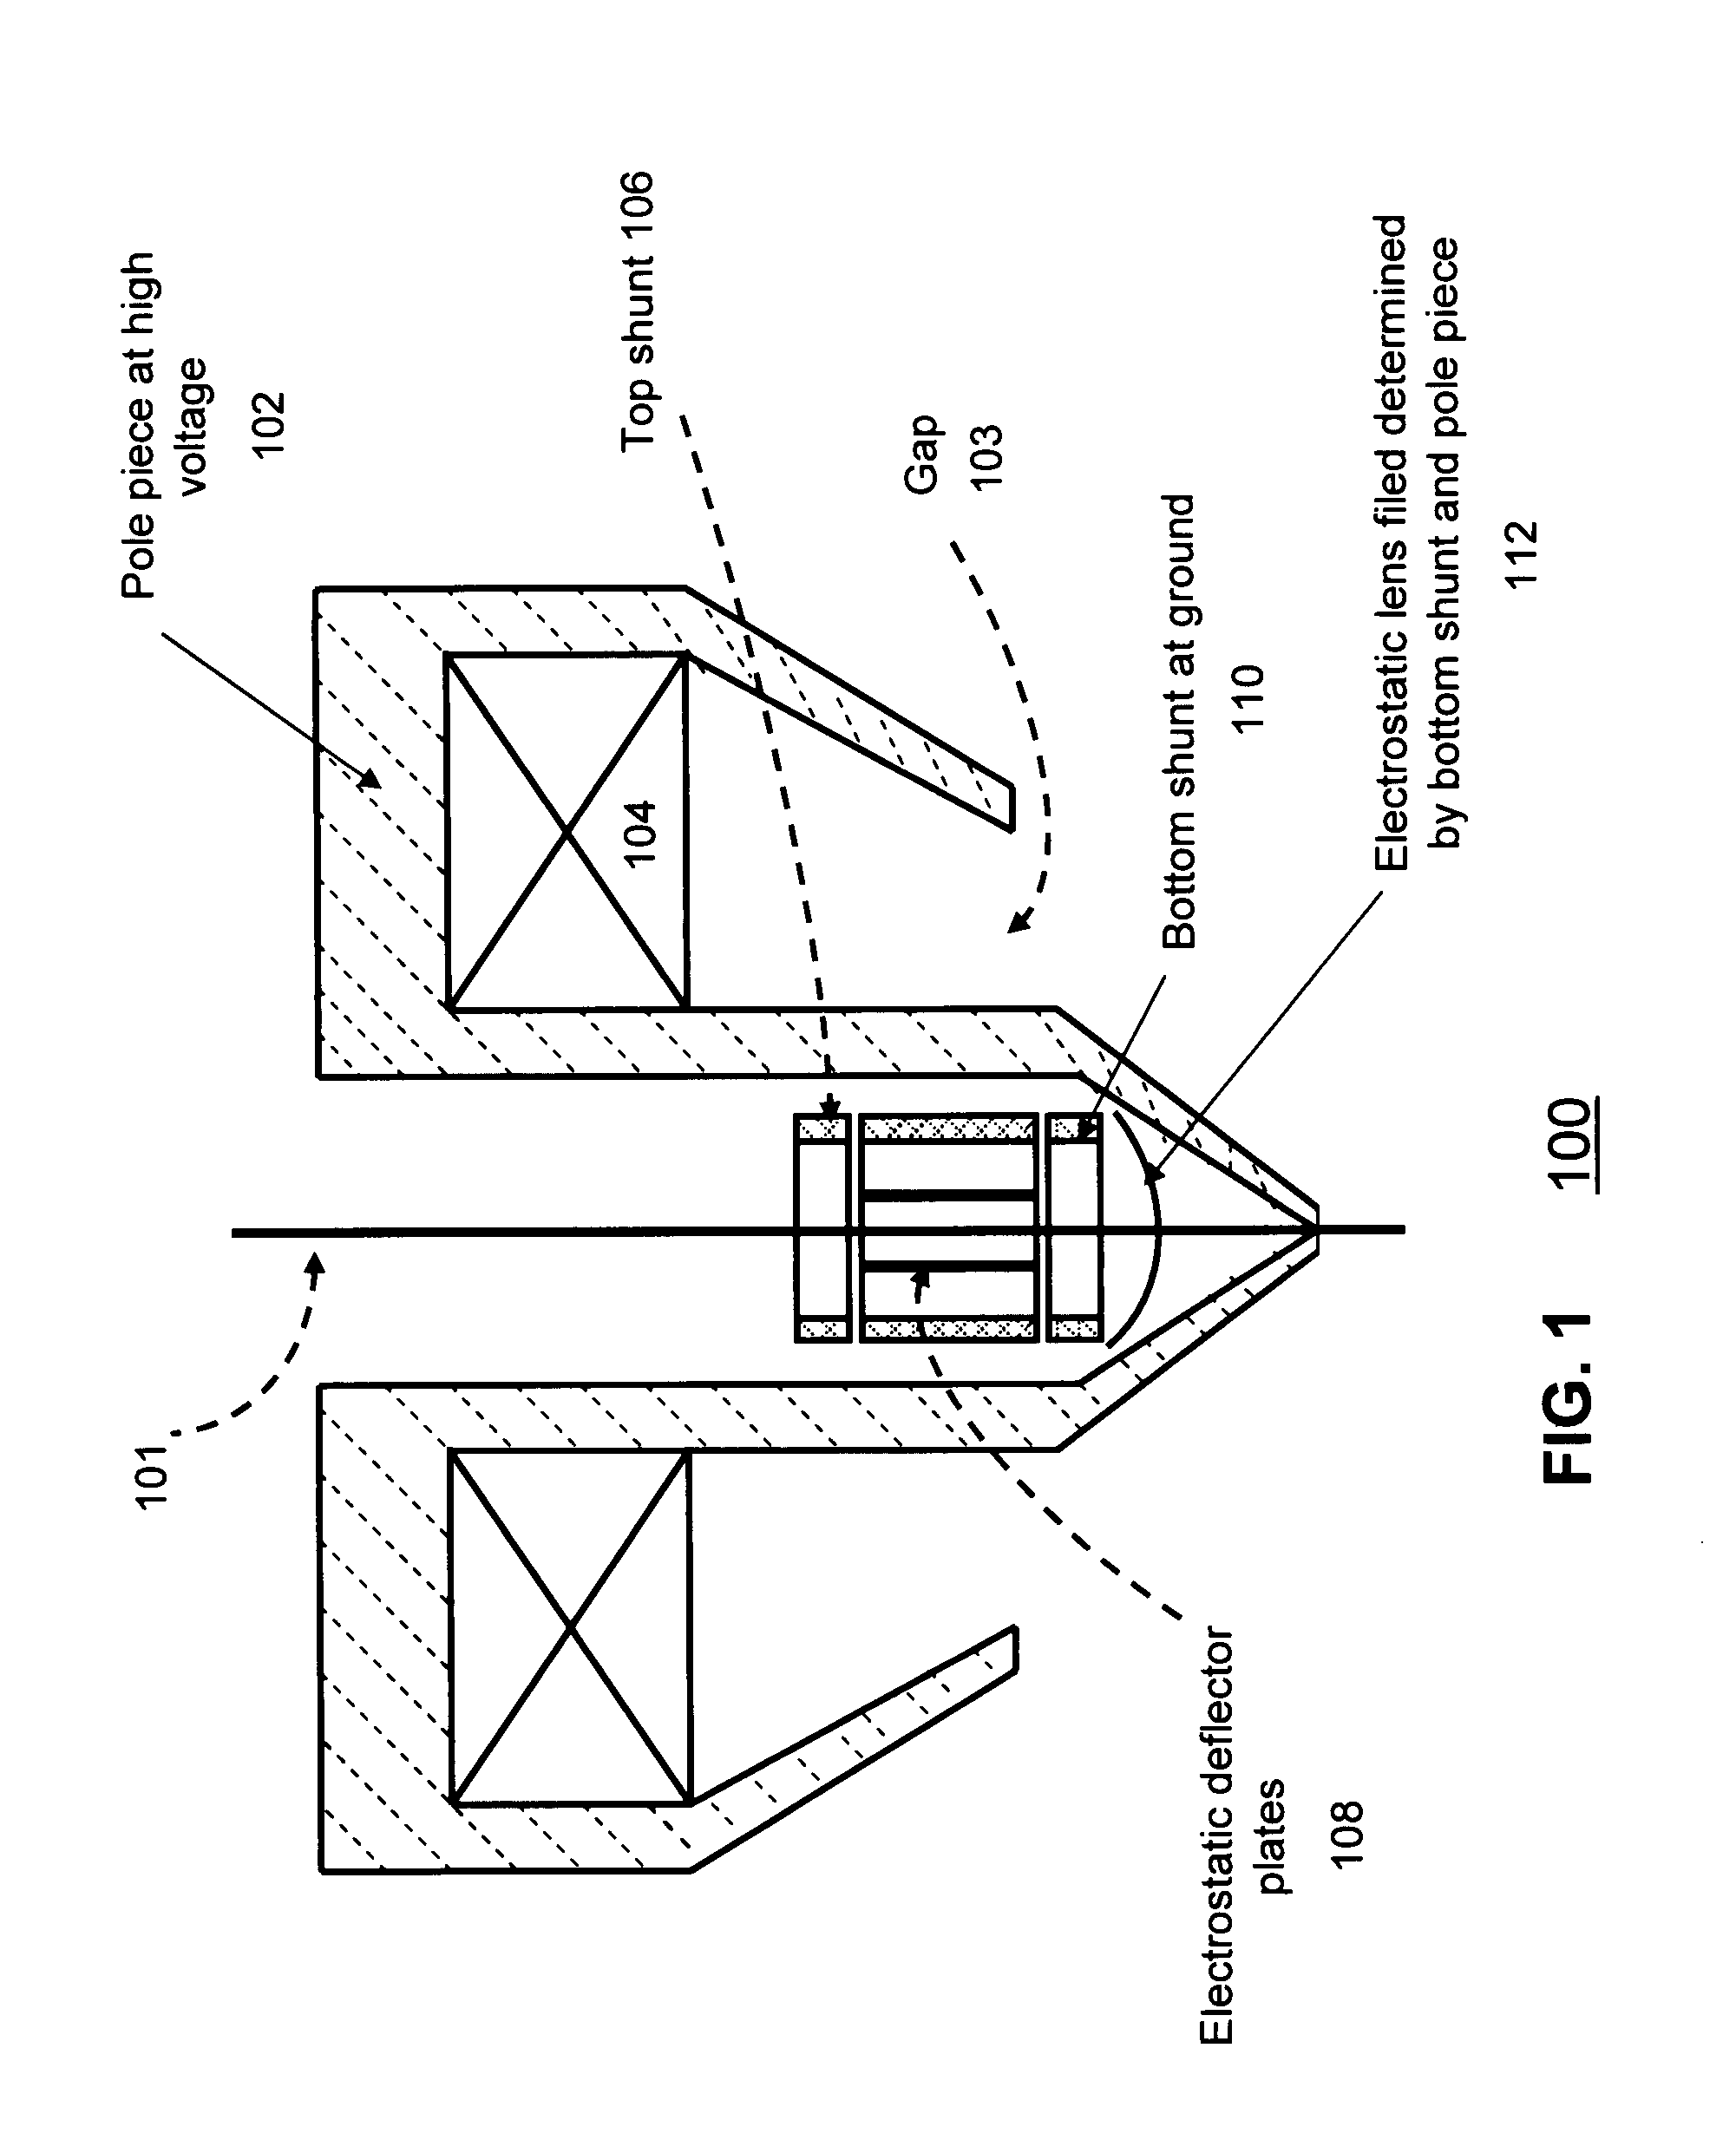 Objective lens with deflector plates immersed in electrostatic lens field